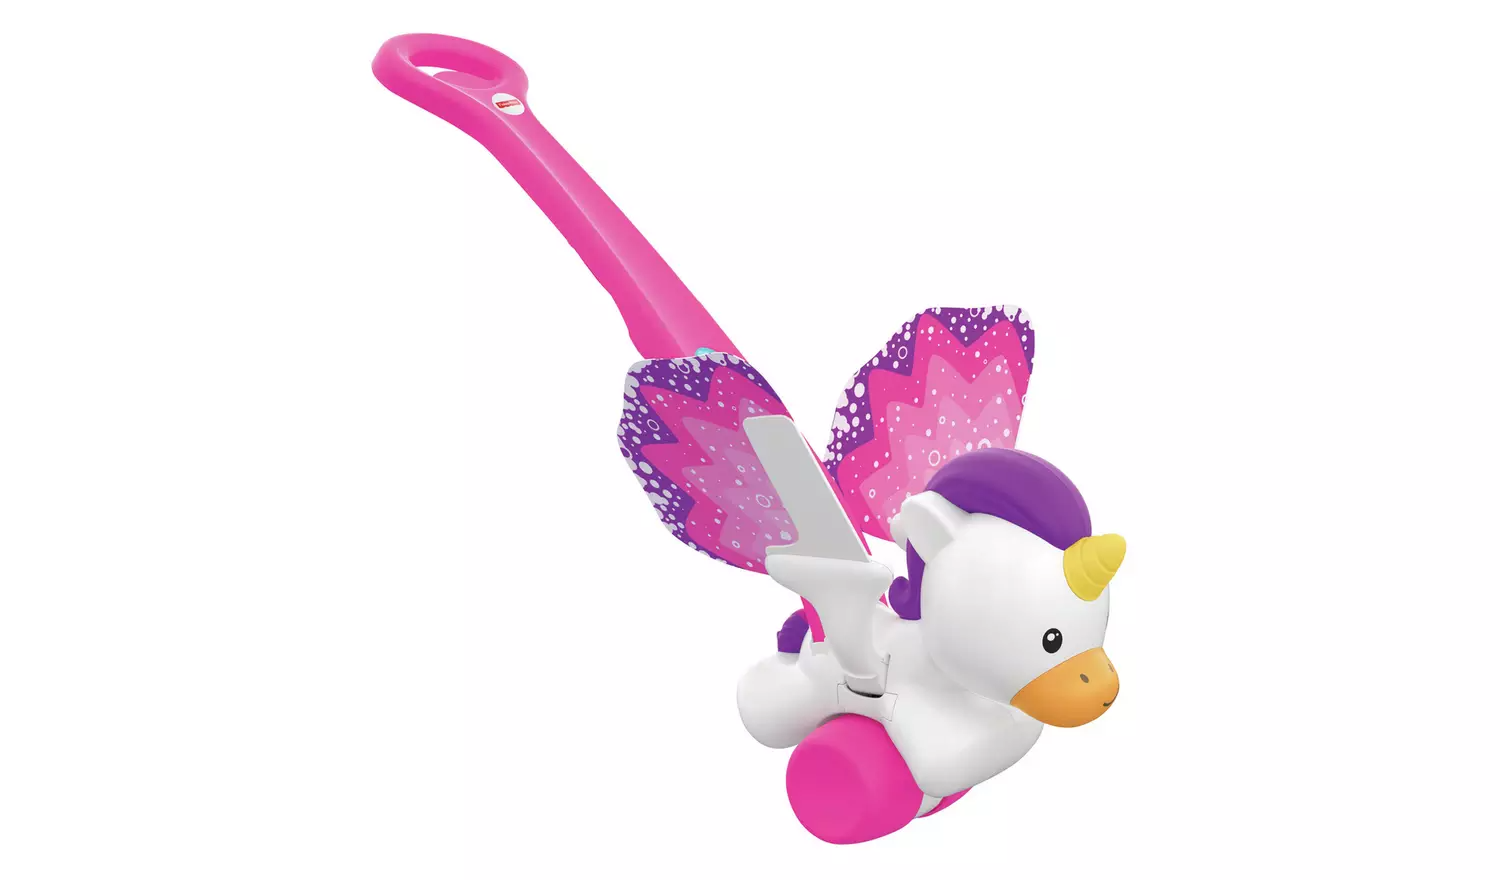 Fisher-Price Push and Flutter Unicorn